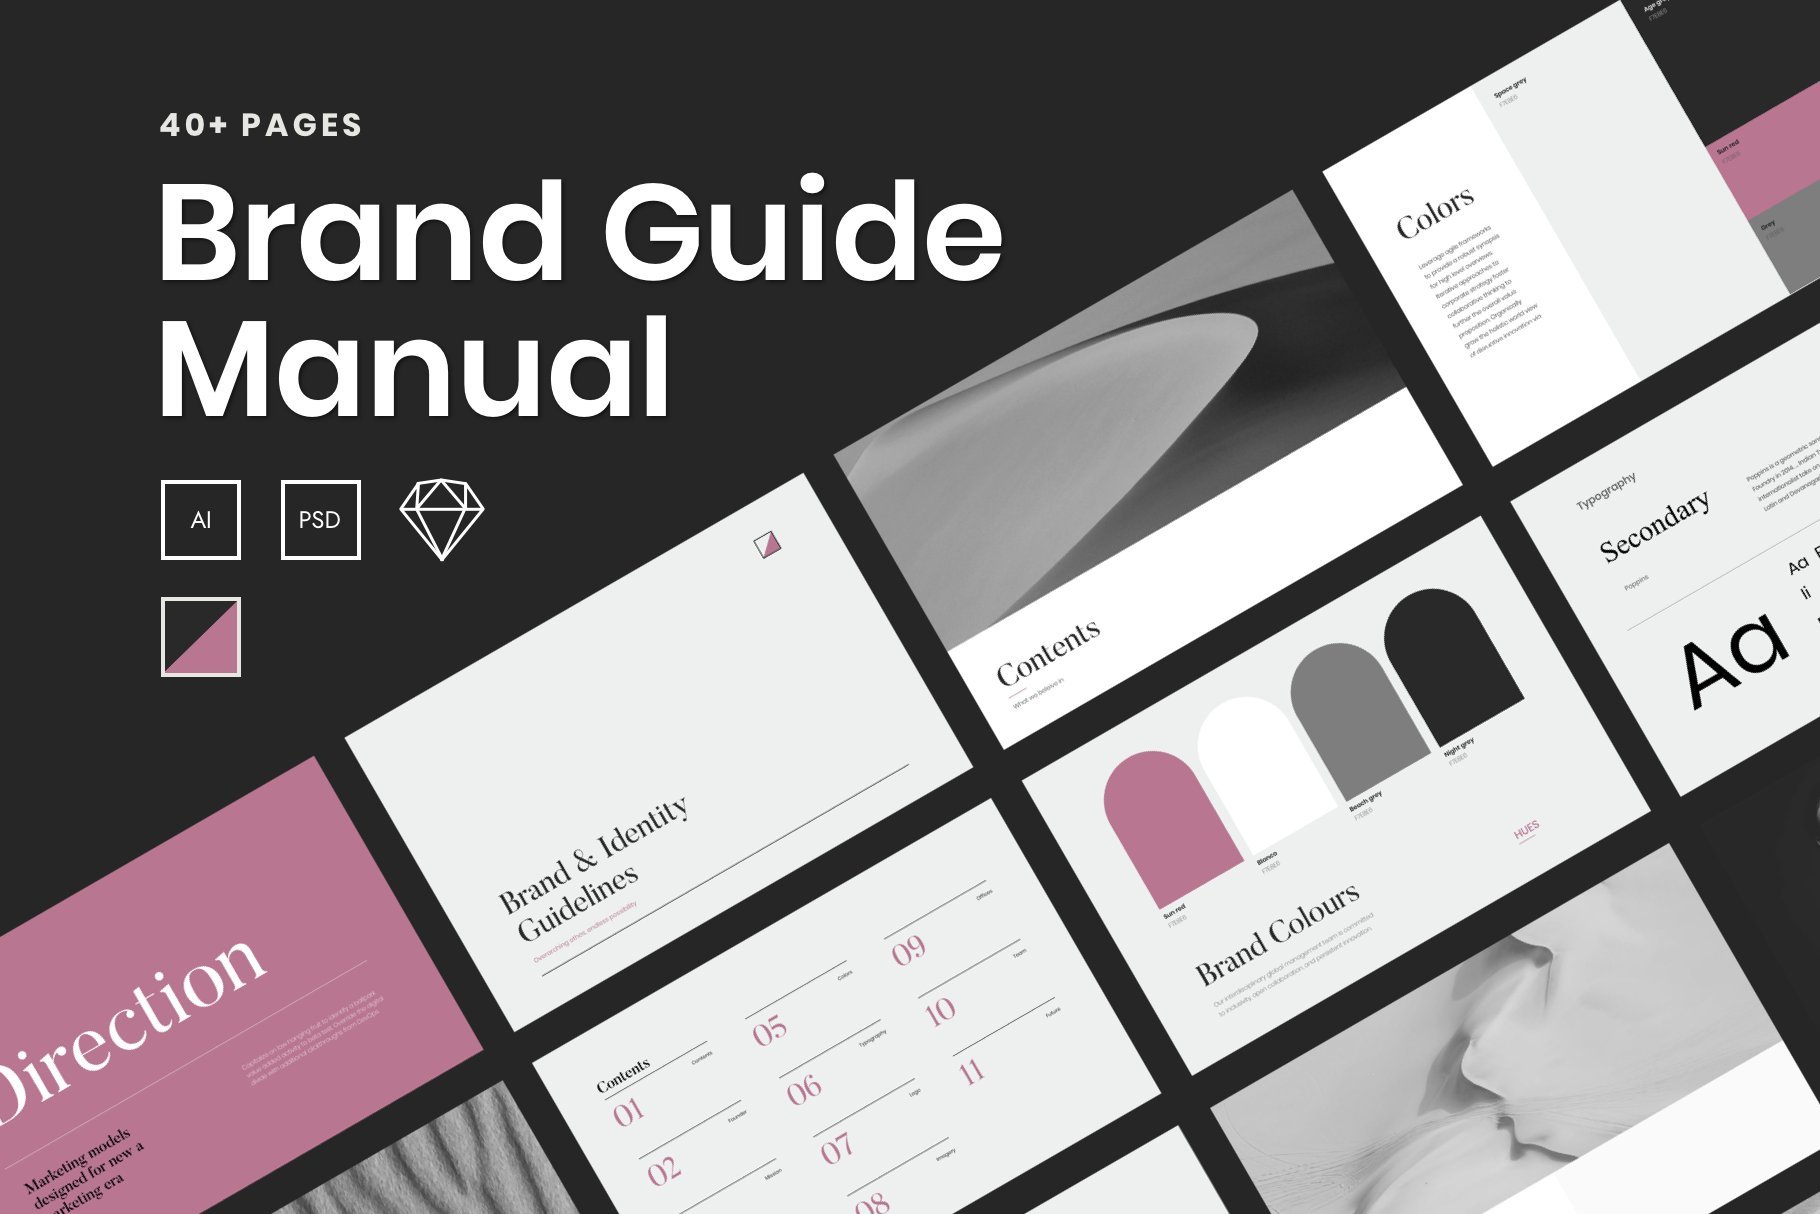 BRAND GUIDELINES: Information and tools that set the standard